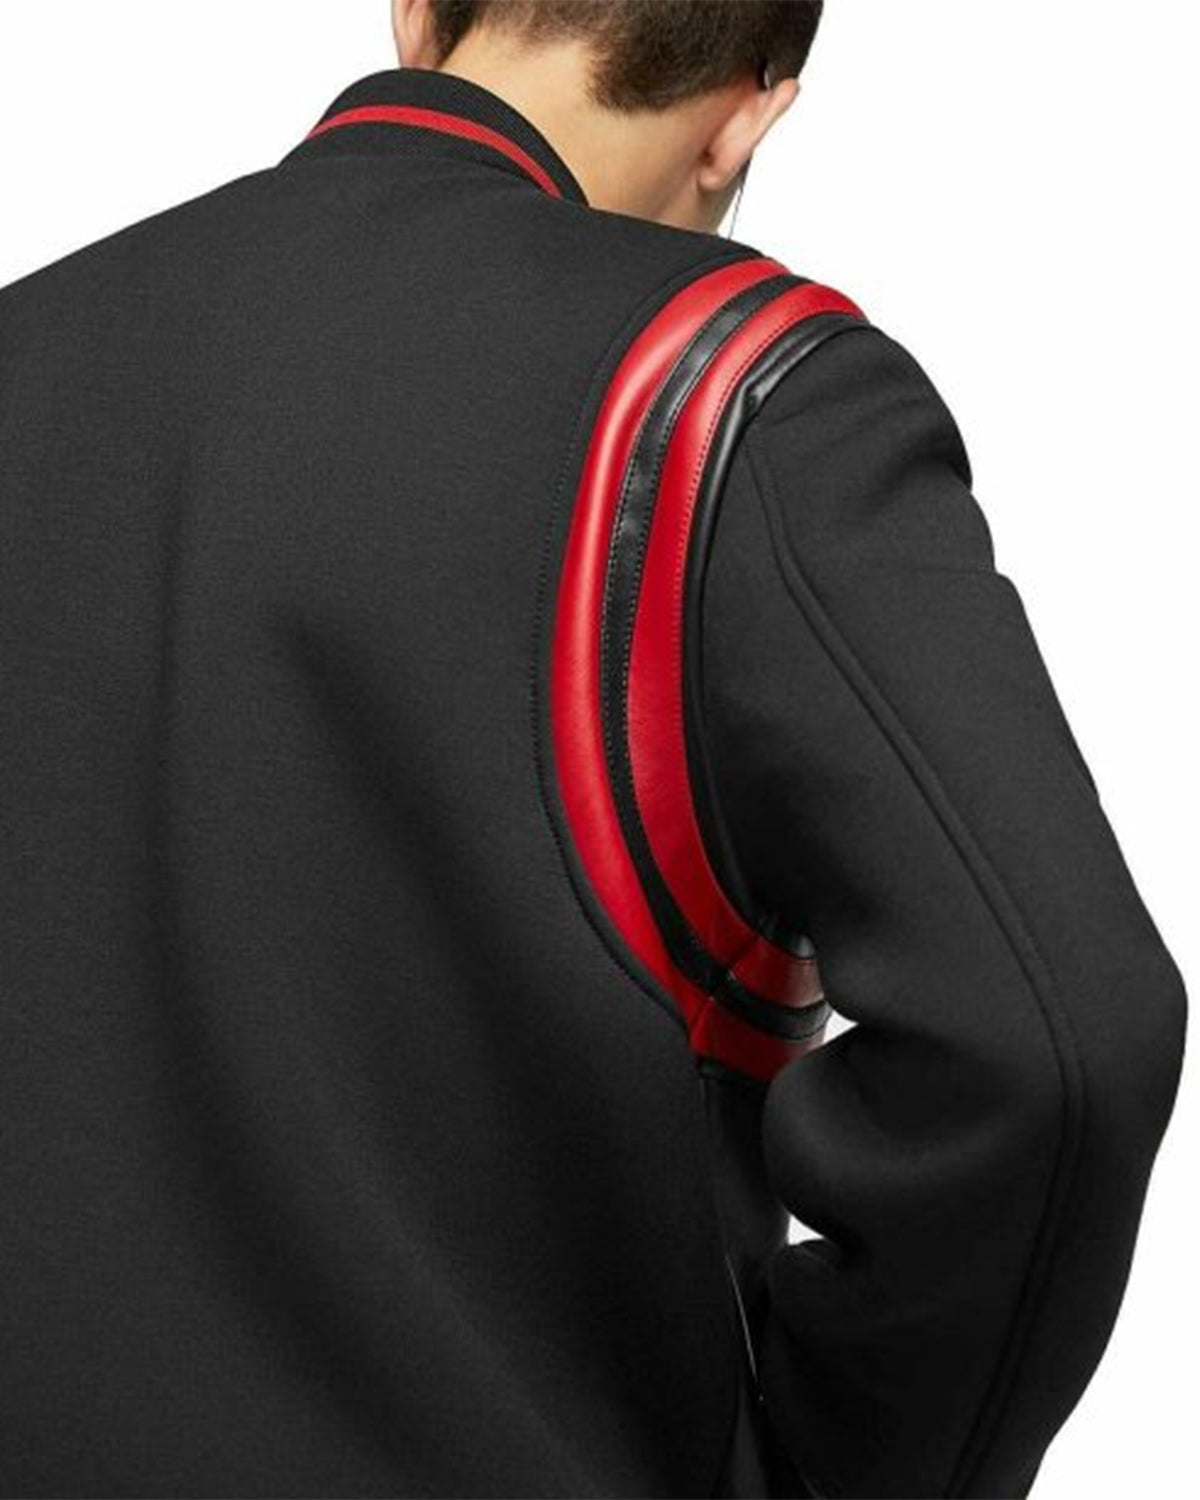 MotorCycleJackets Mens Black with Red Stripes Leather Jacket